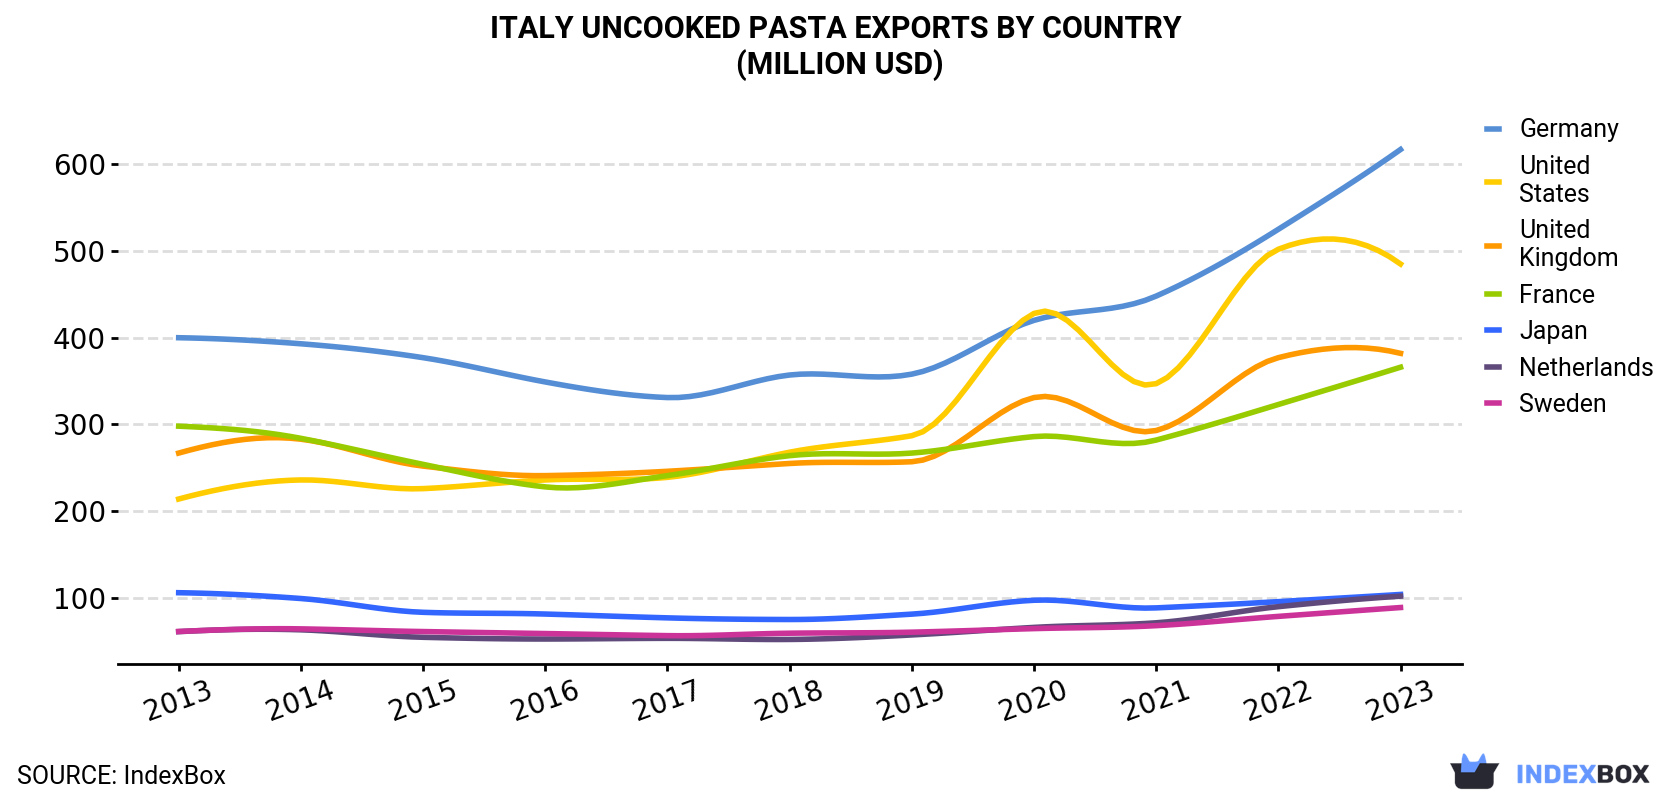 Italy Uncooked Pasta Exports By Country (Million USD)